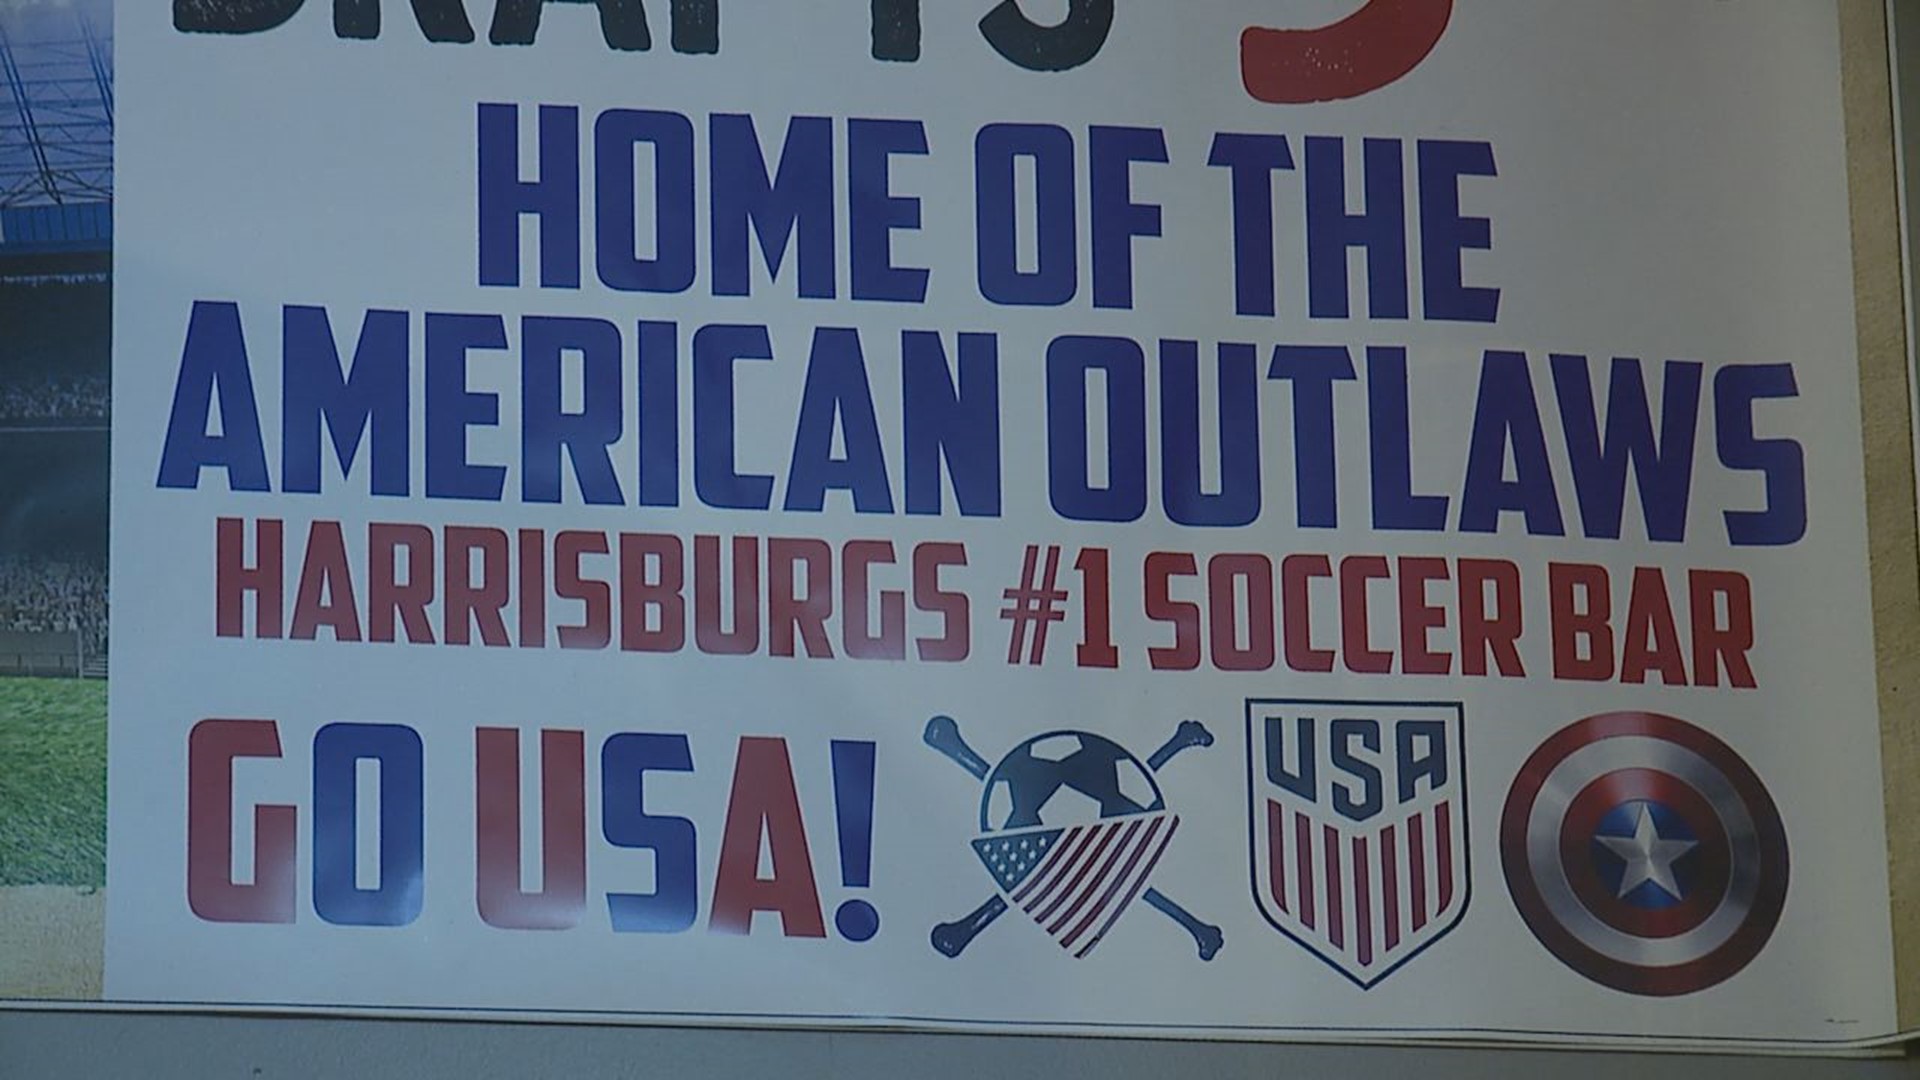 Some members of the Harrisburg chapter have even gone to World Cup games in the past.